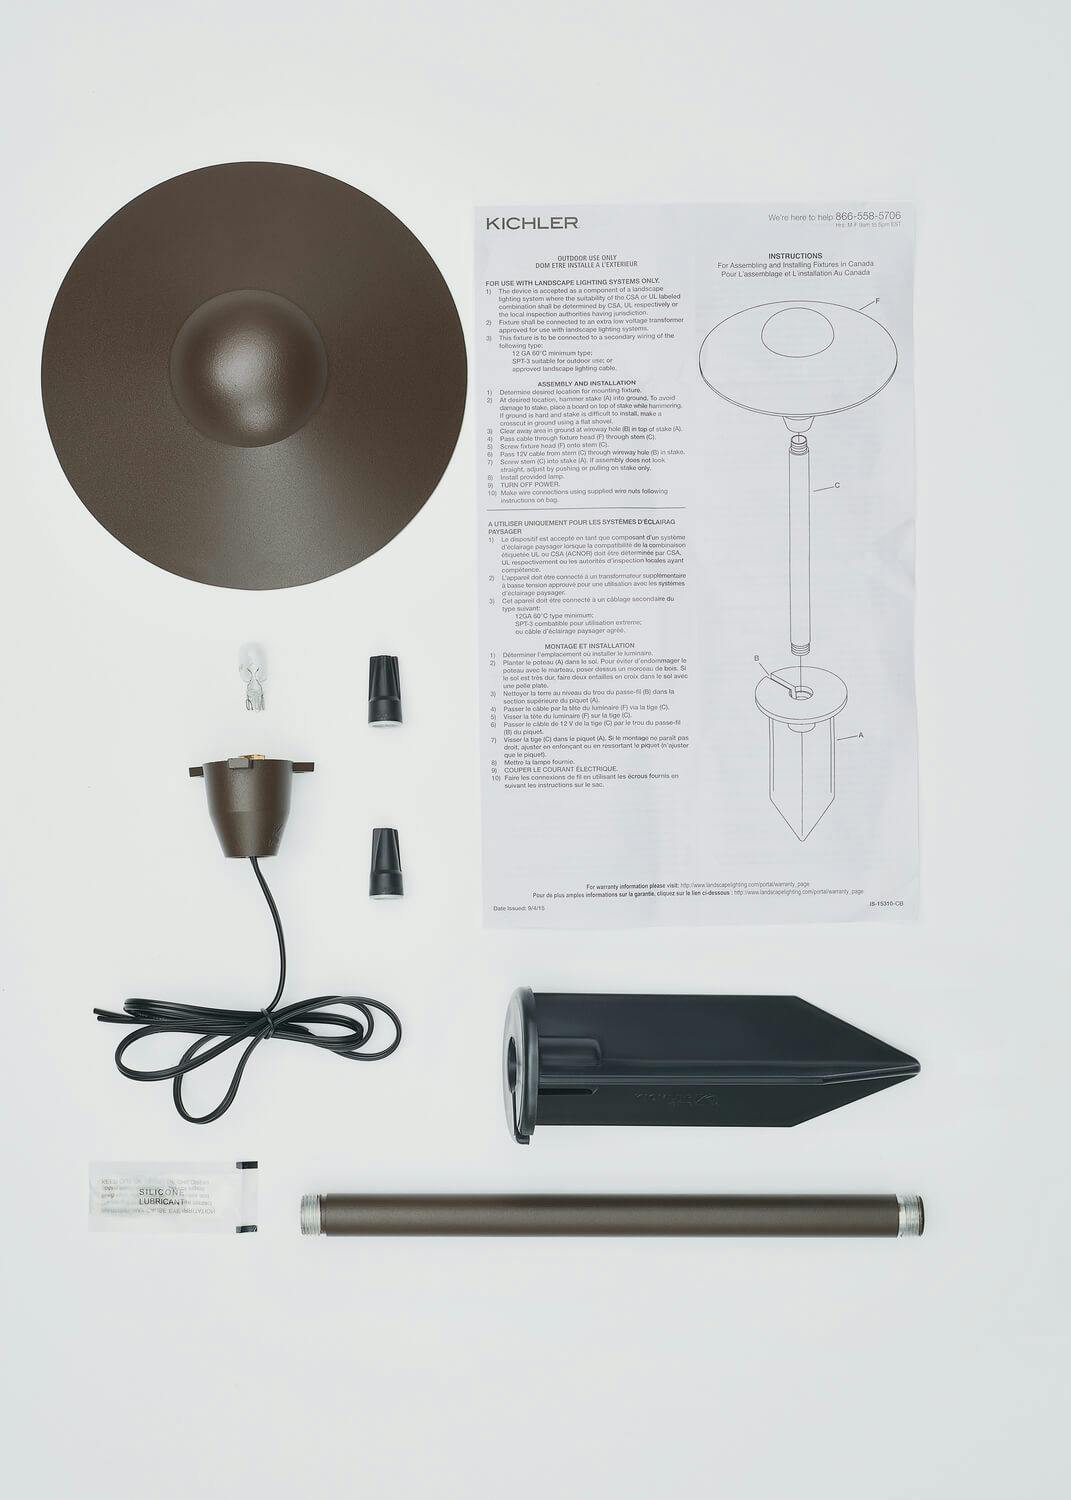 What's in the box for the 8" Dome Short Stem 12V Path Light Textured Architectural Bronze